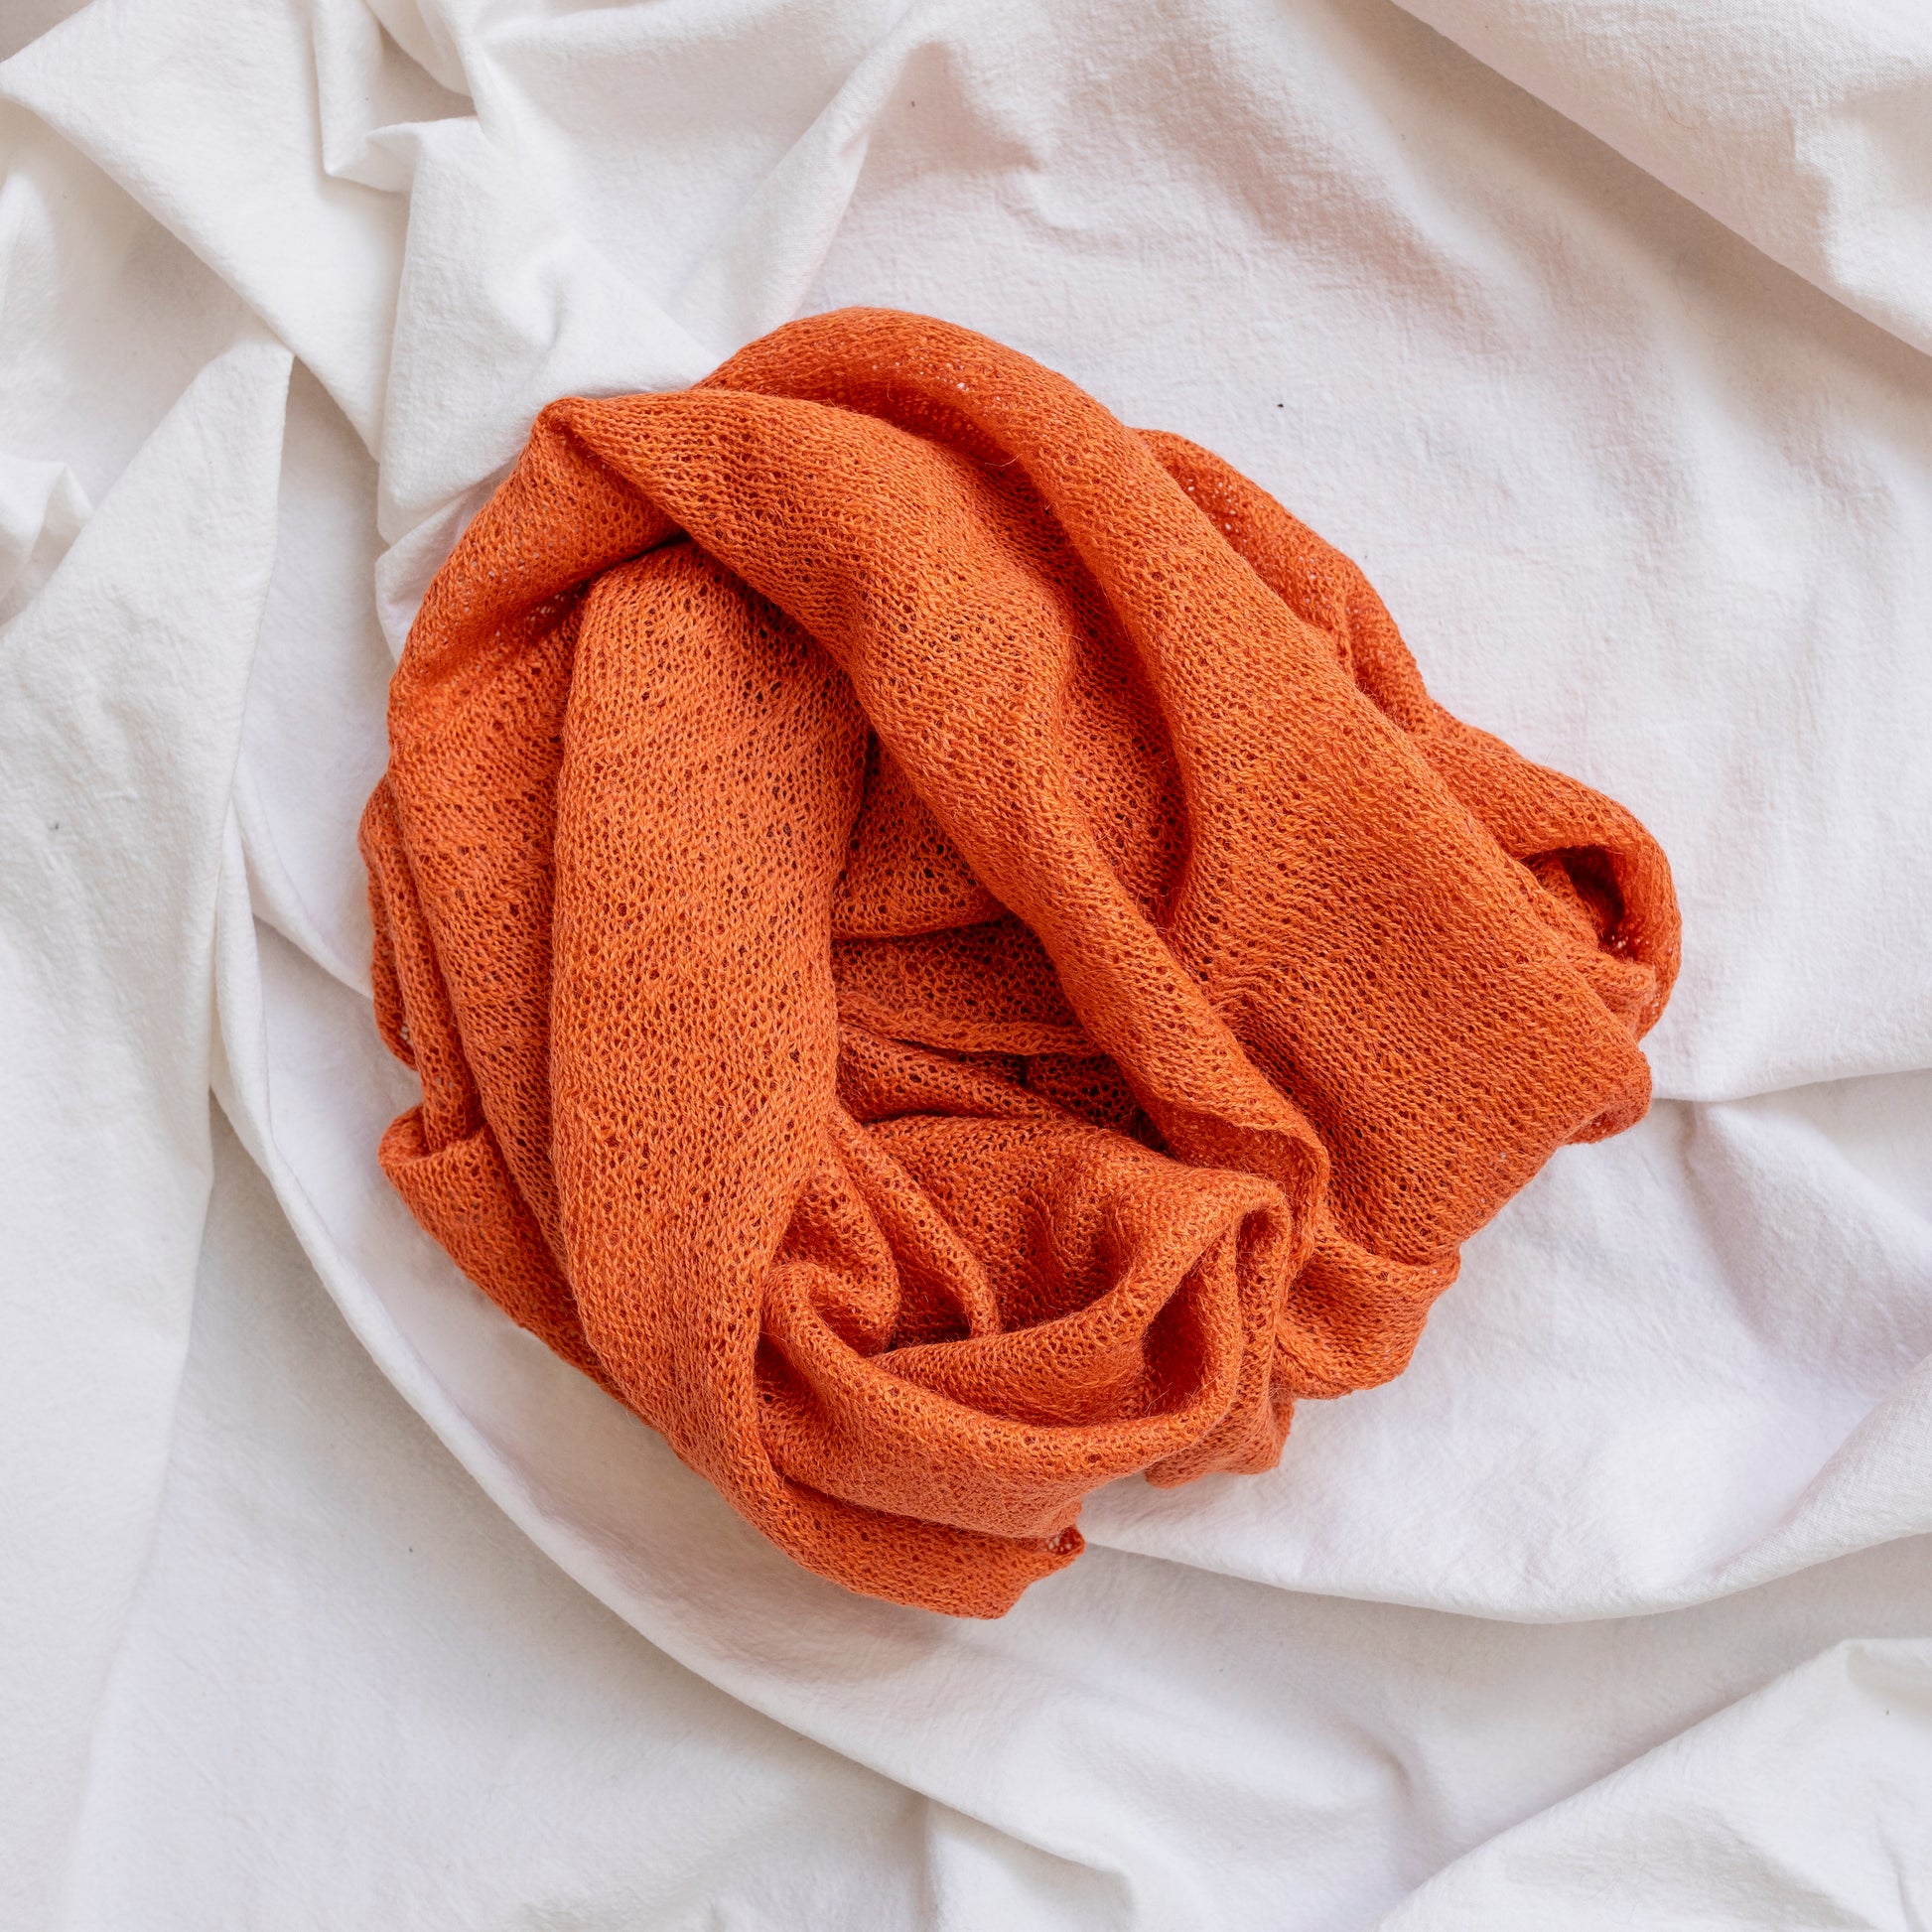 Orange coloured lightweight and delicately woven scarf. Hand-made by artisans.  